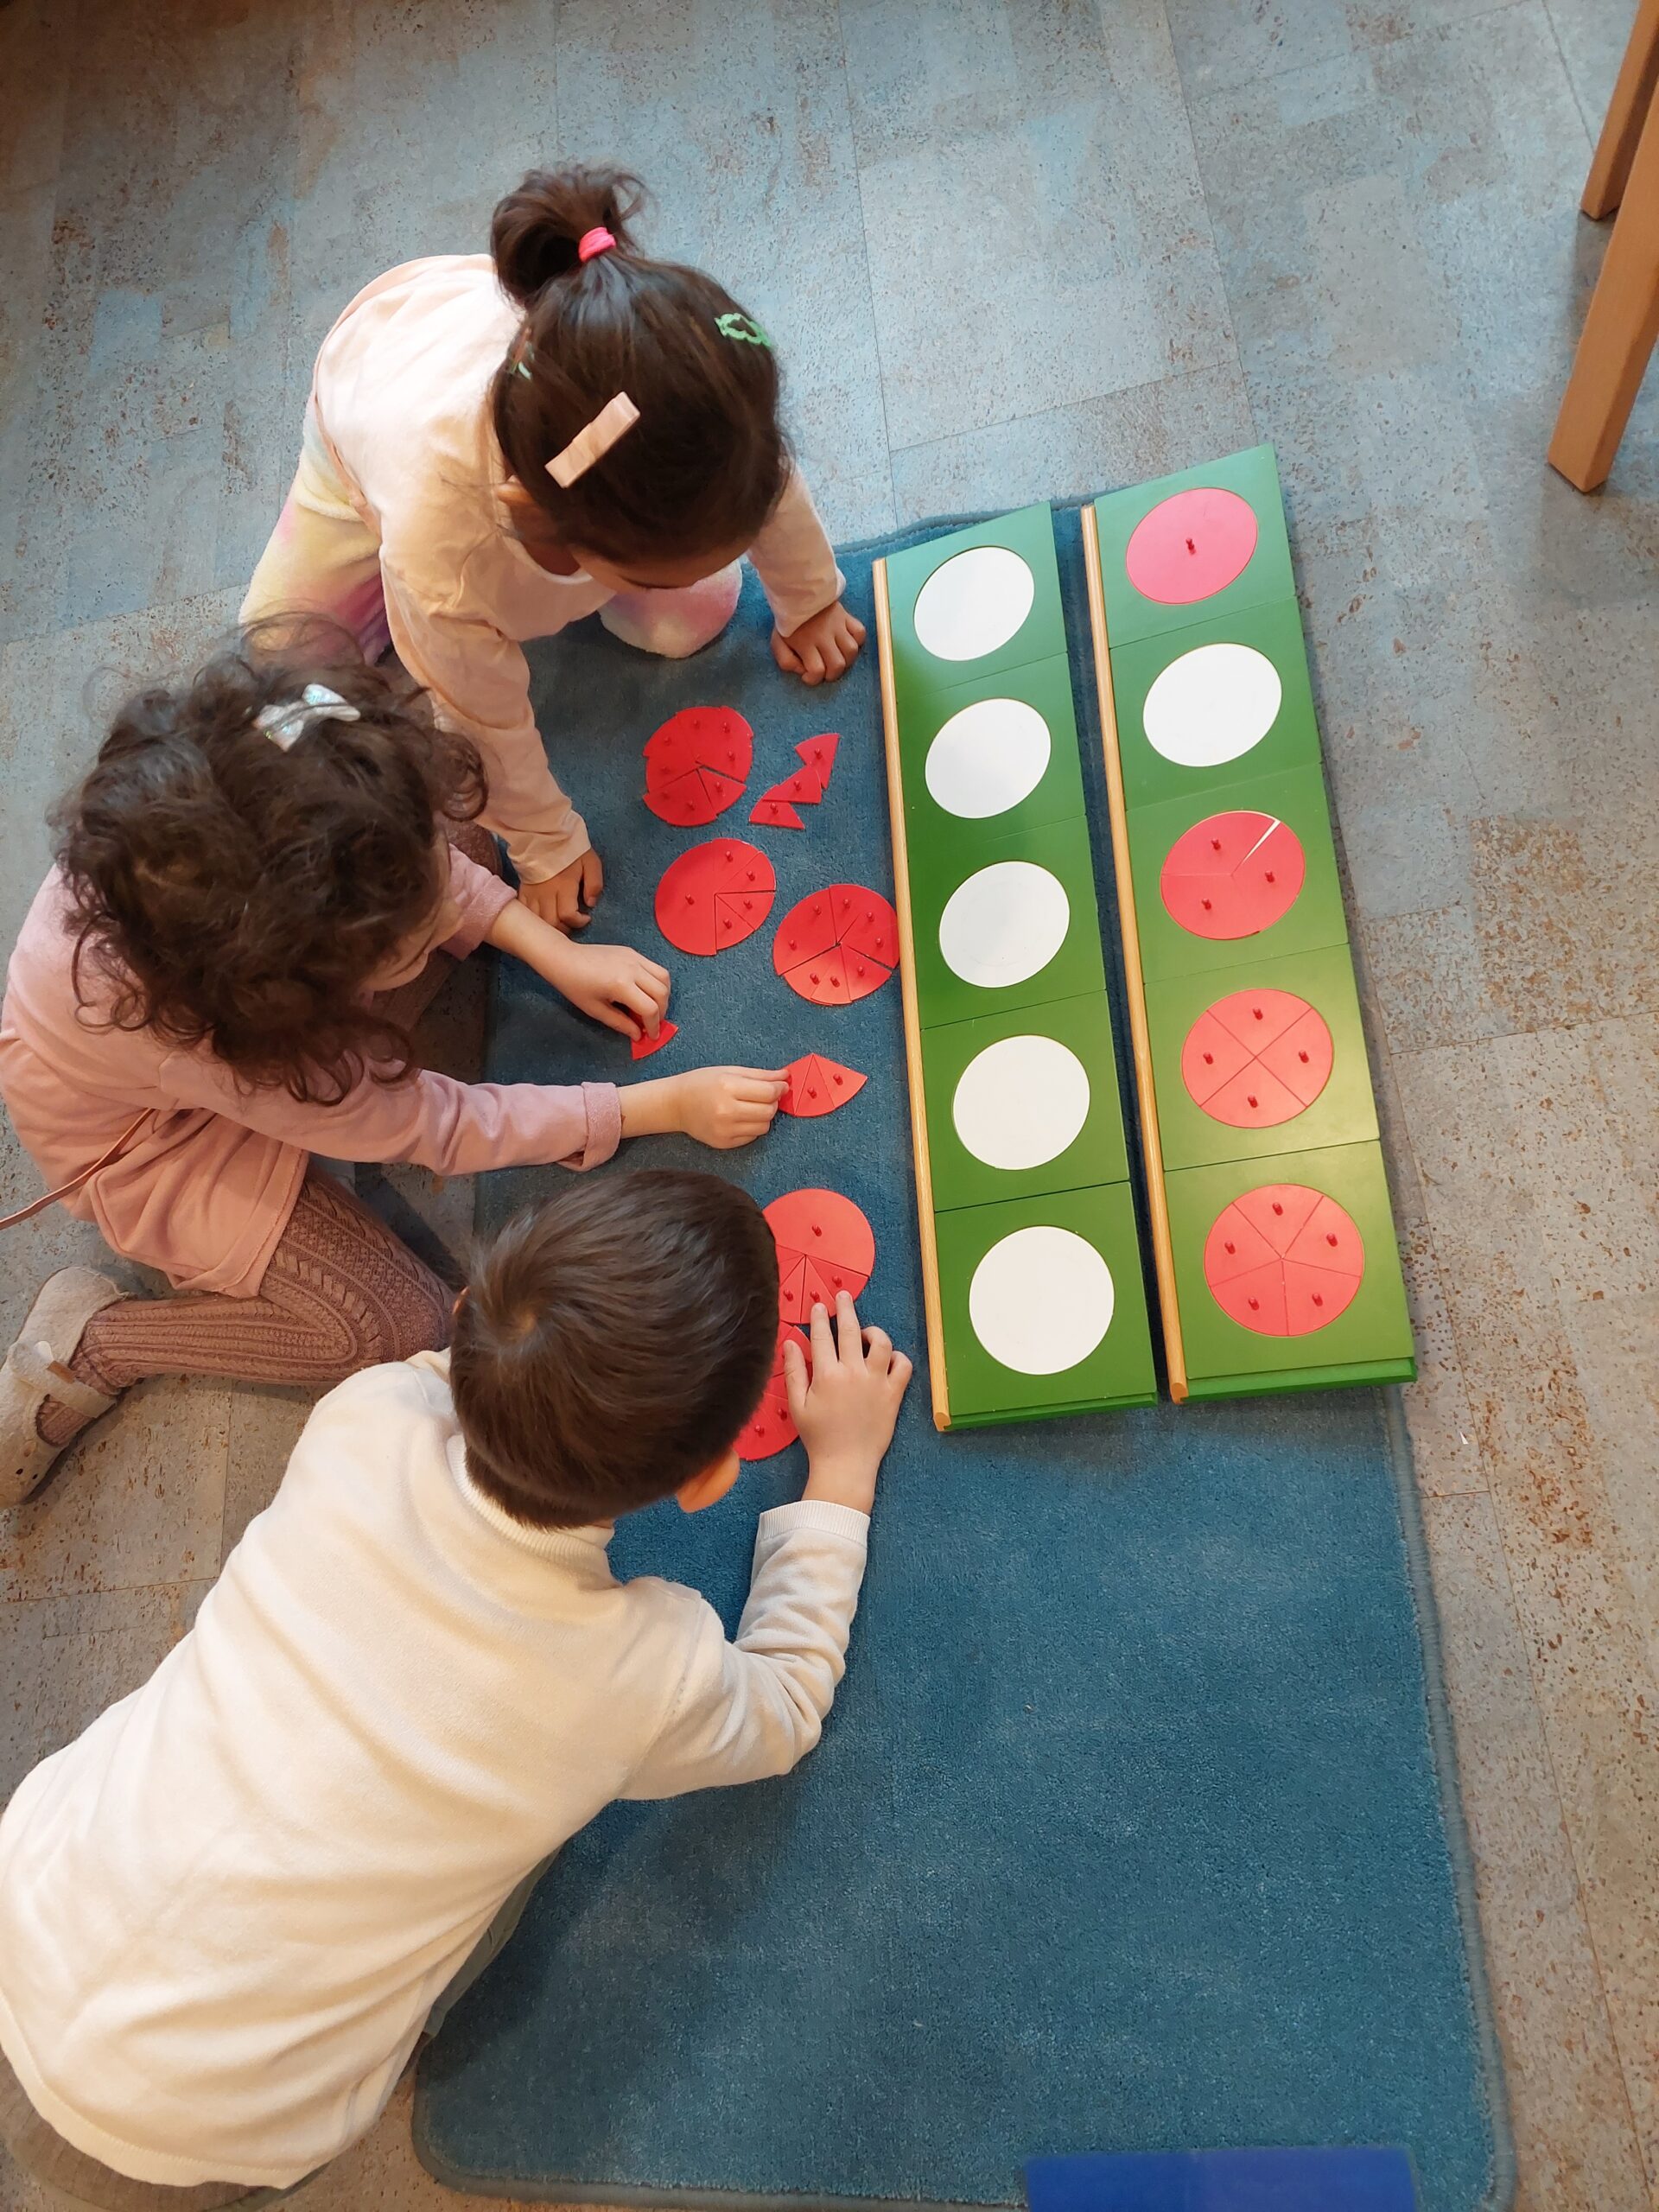 A conversation with Annett Romoth, Cycle 1 pedagogical director, and Daniel Schubiger, from the management and administration team, about Montessori education - Lipschule